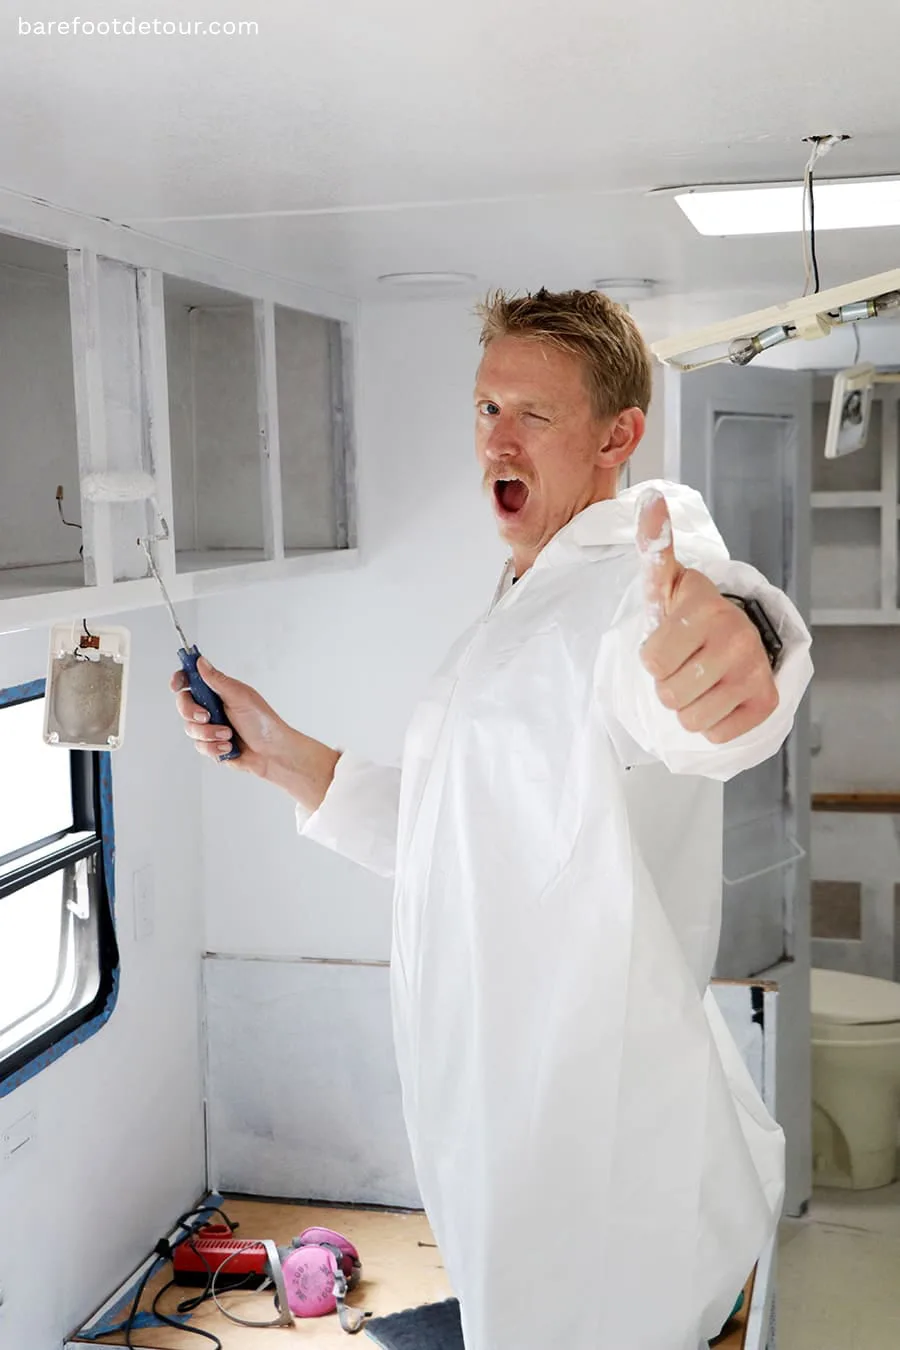 The best primer and paint for renovating an RV